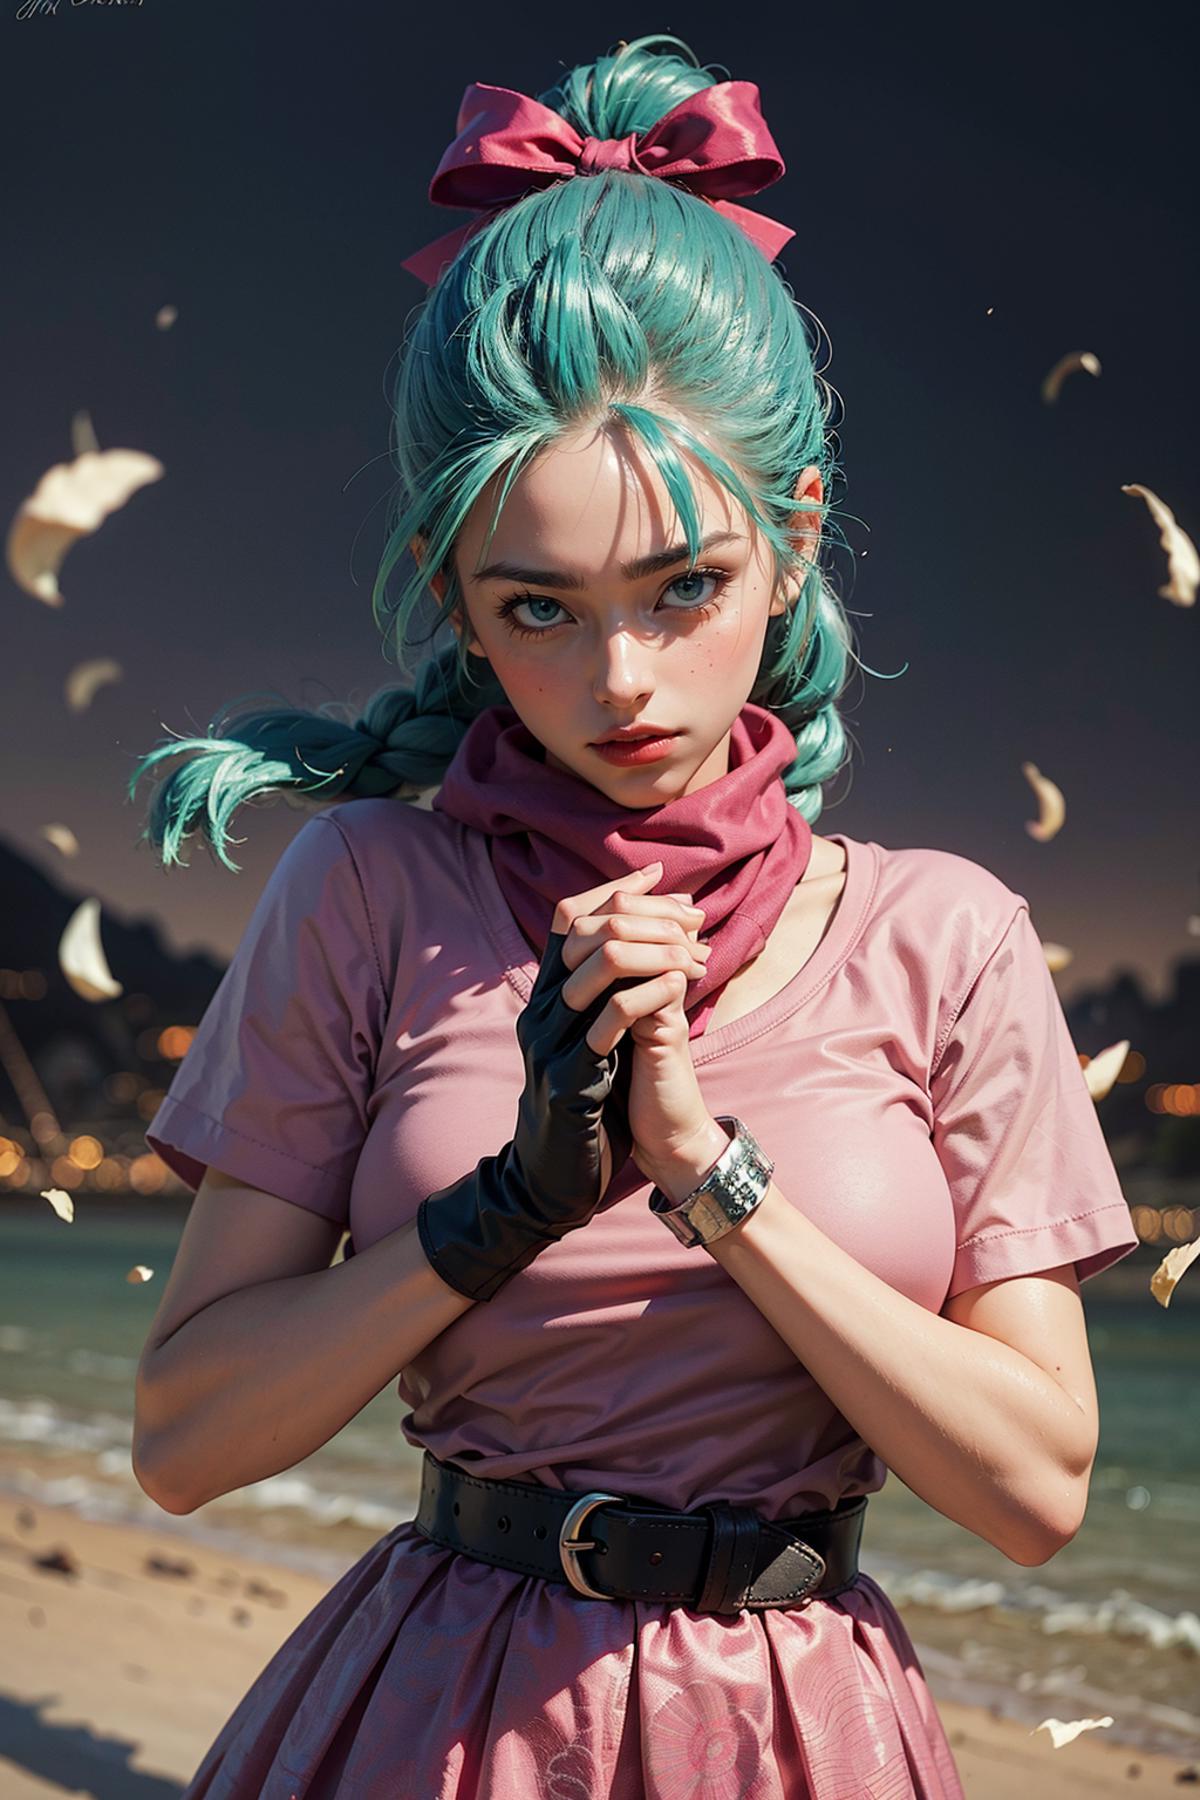 A woman with blue hair and a pink shirt is looking up at the sky.